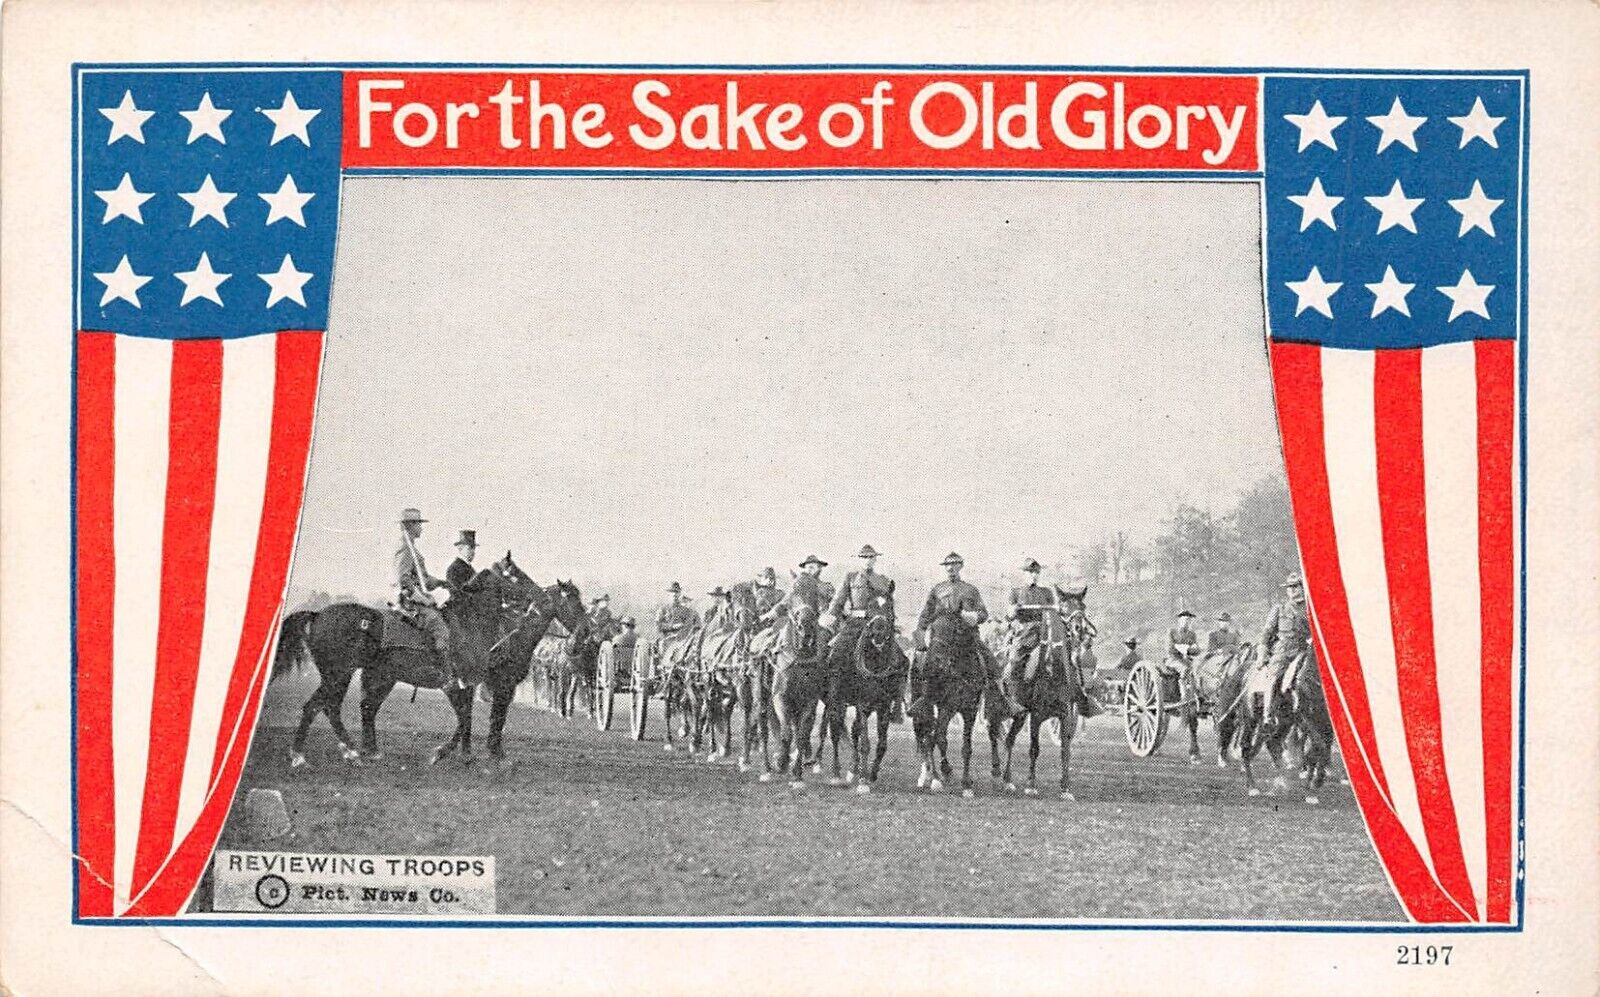 WWI Military For The Sake of Old Glory REVIEWING THE TROOPS Postcard